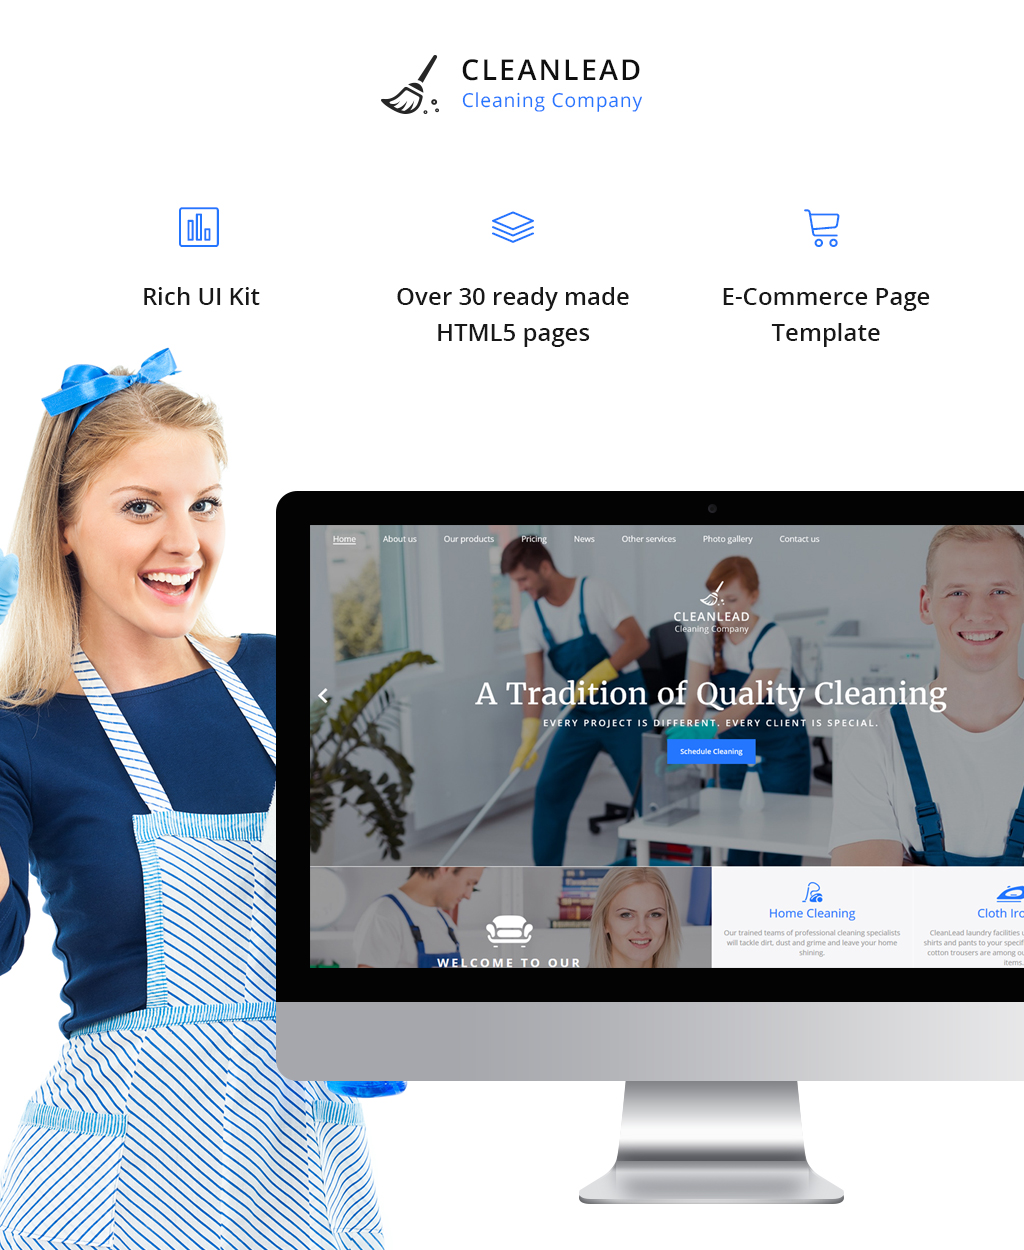 Cleanlead Cleaning Company Website Template